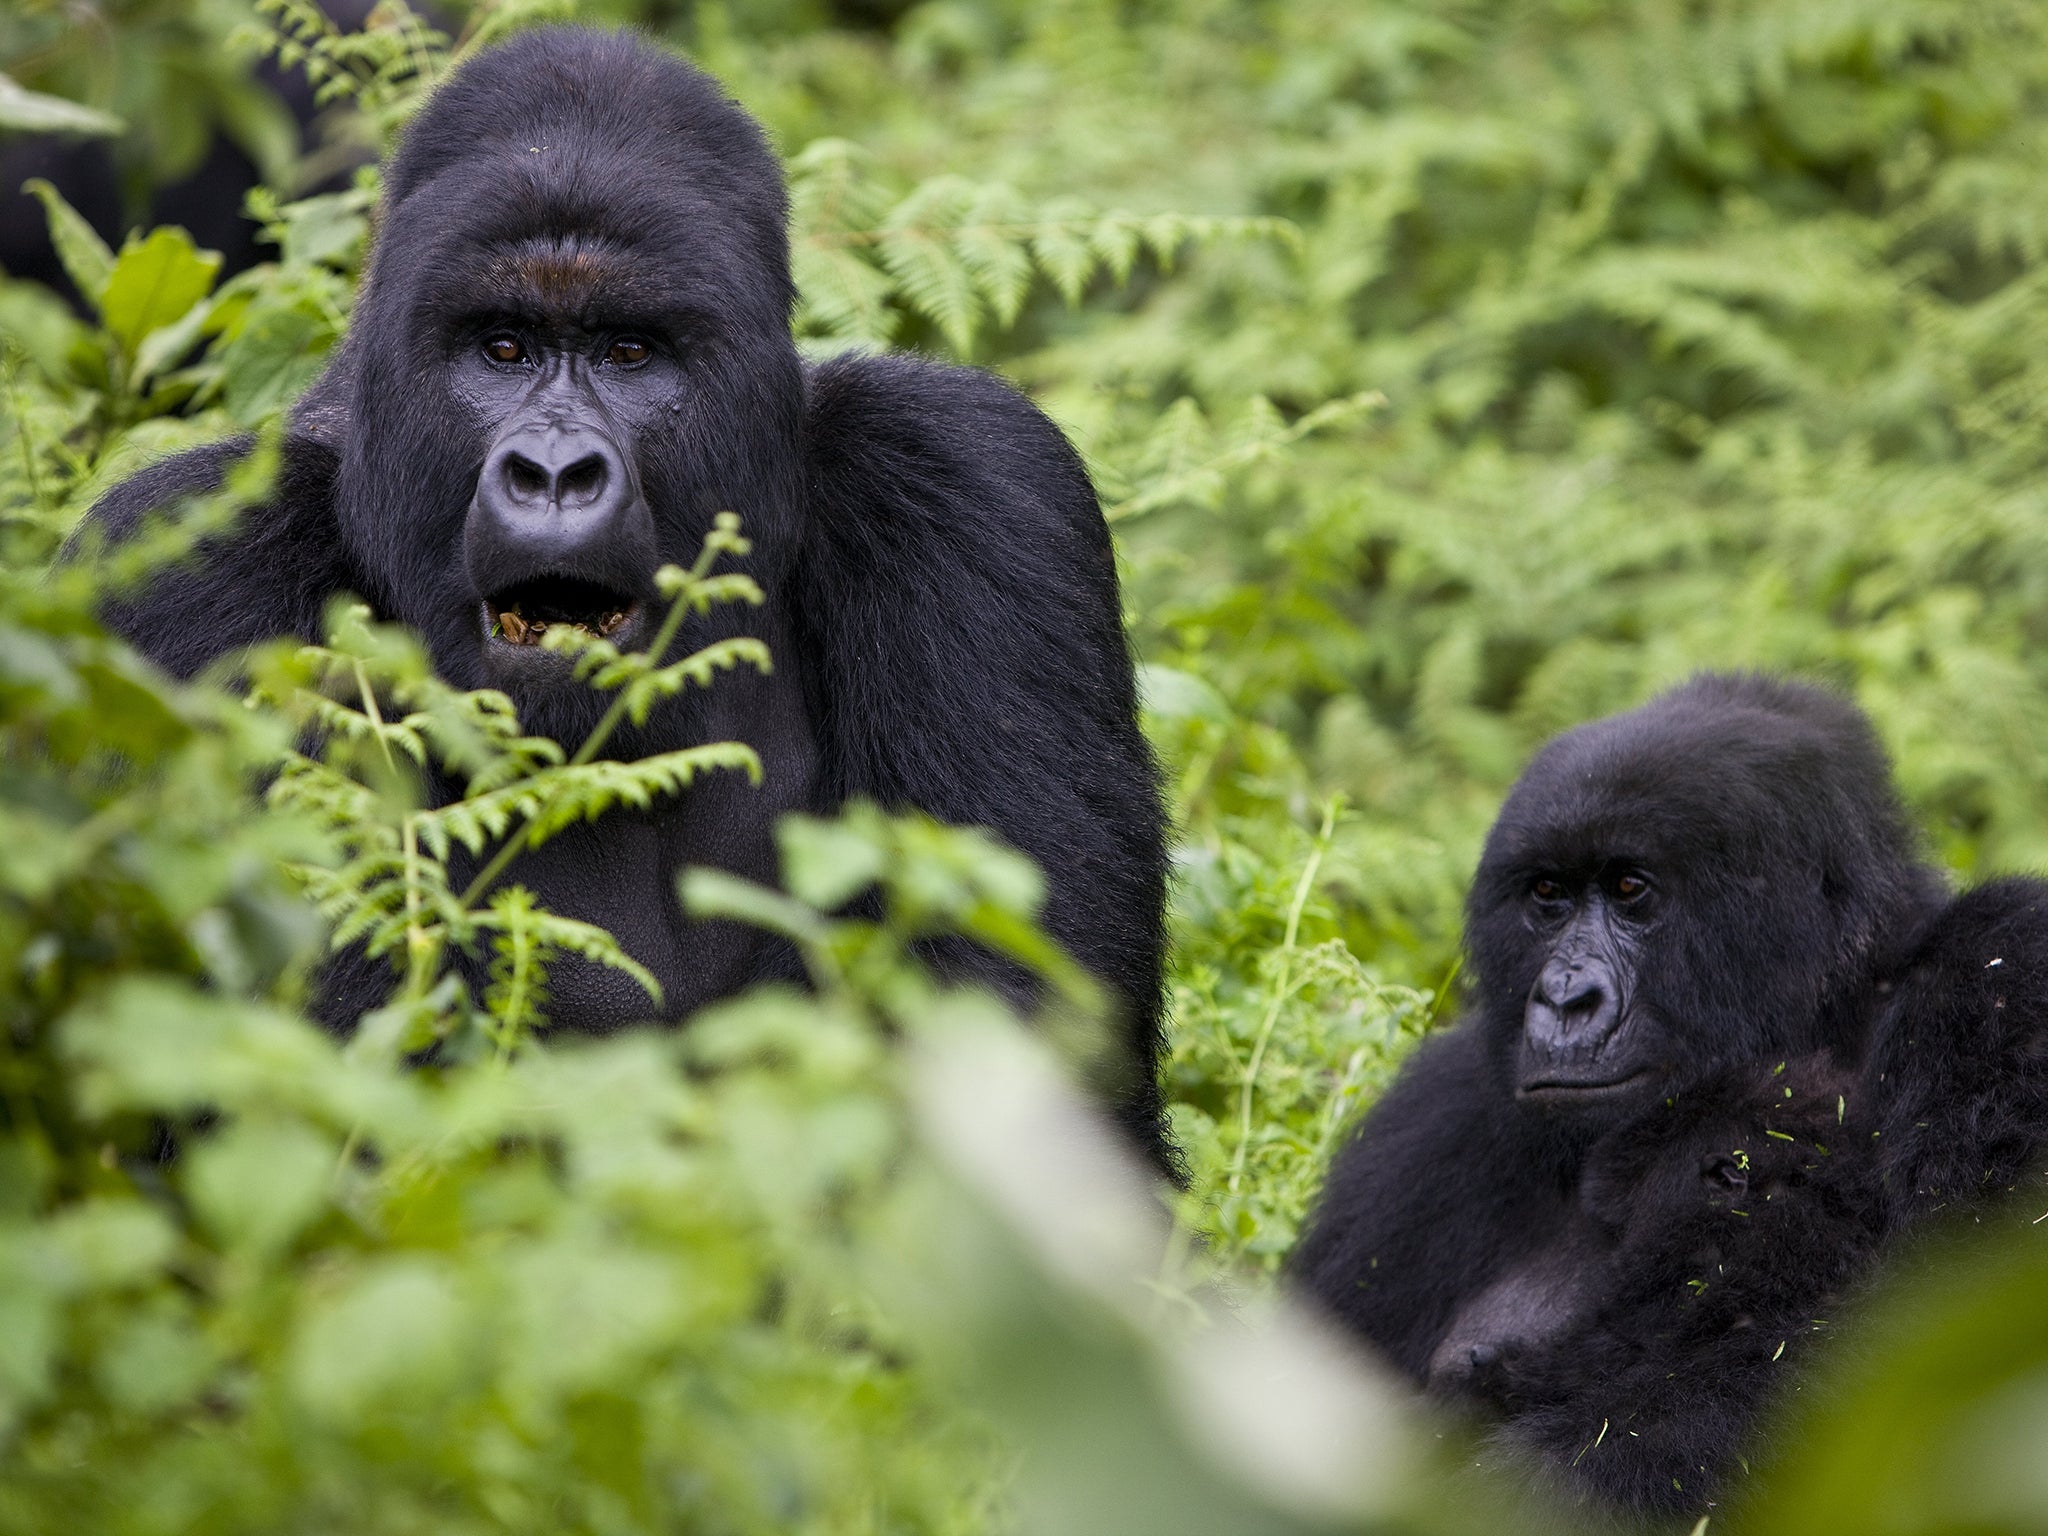 Mountain gorillas may not be prone to the same genetic problems of inbreeding that have aided the demise of other species